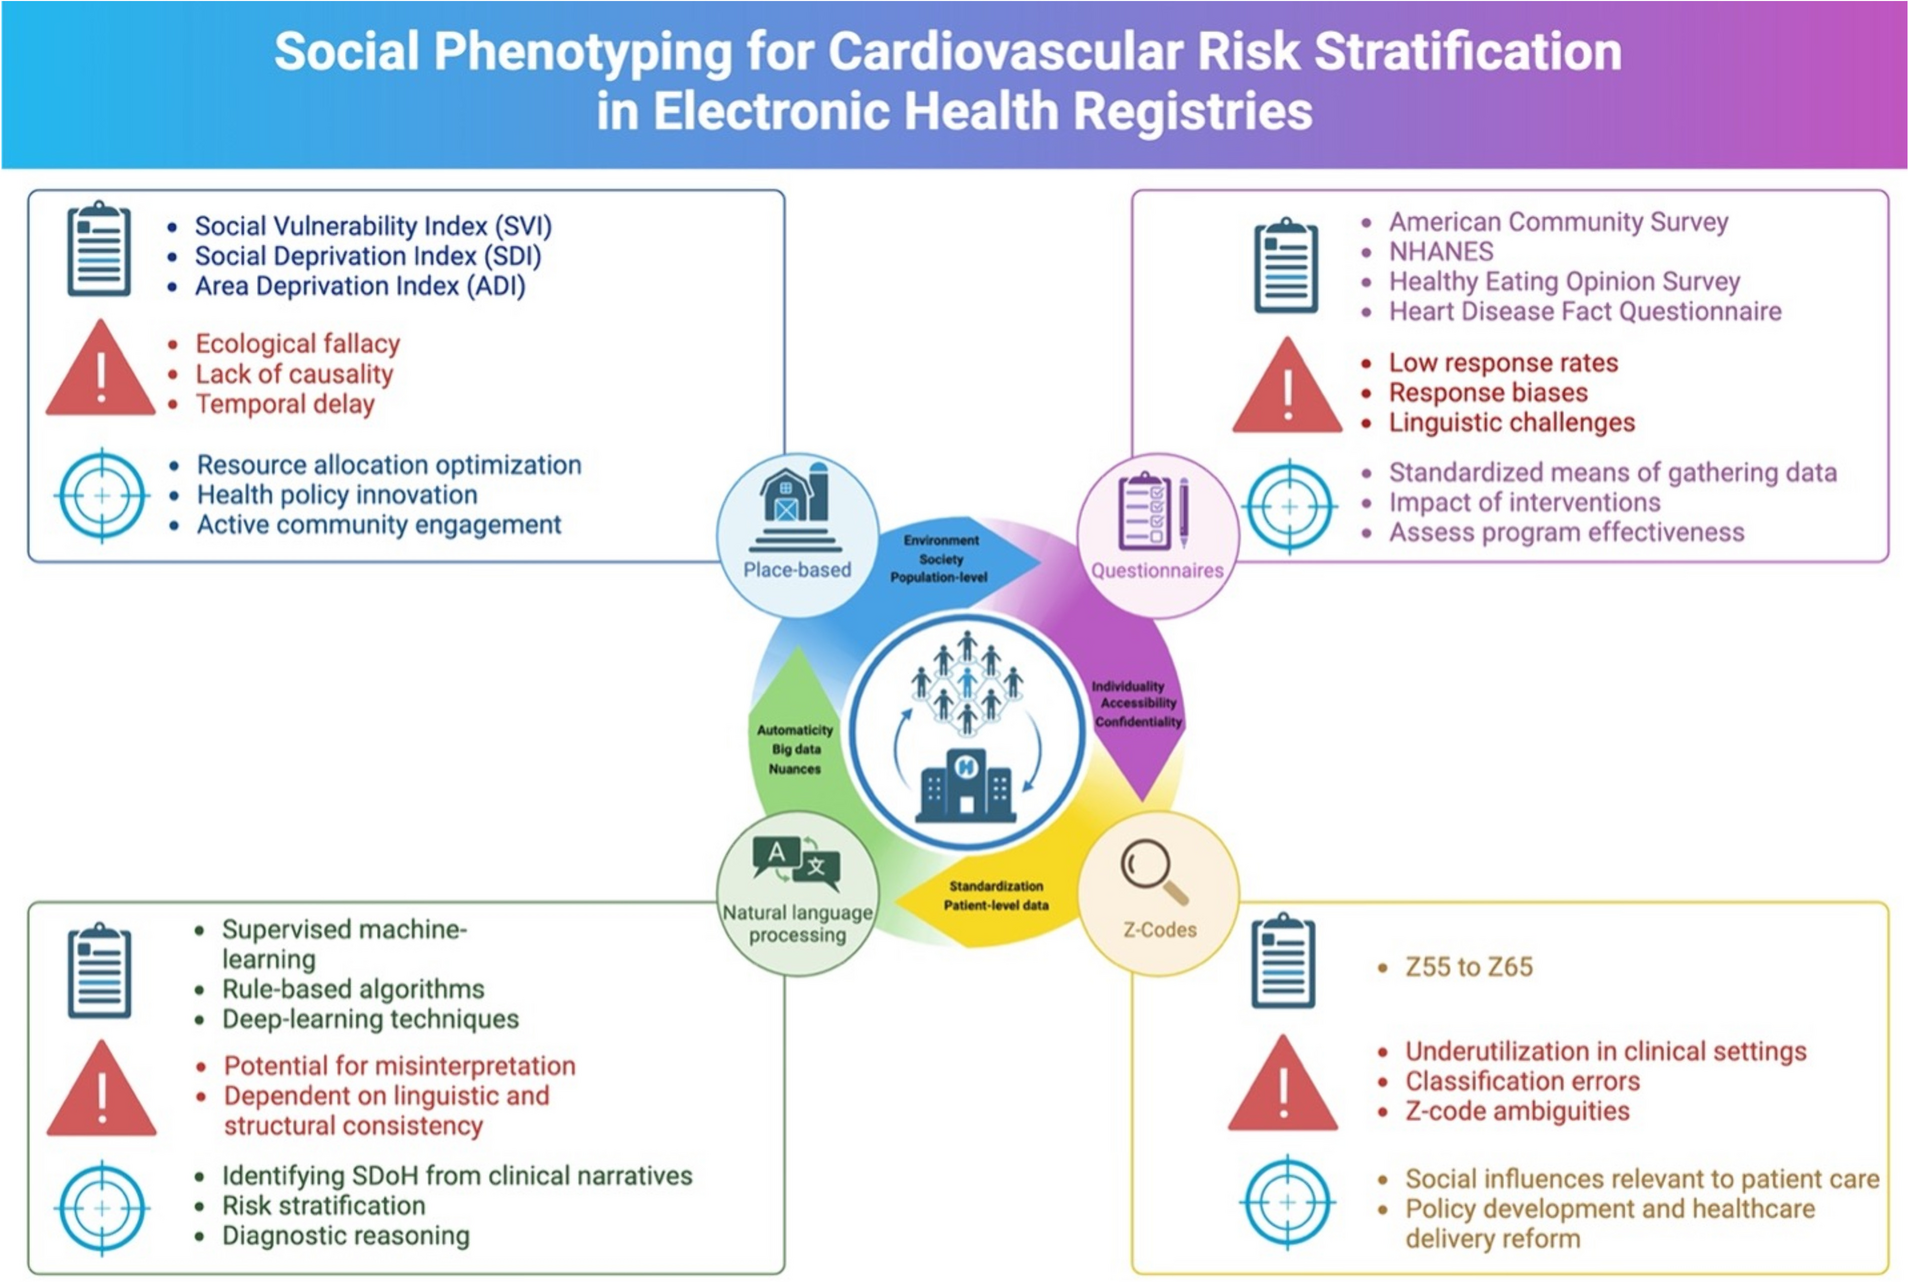 Social Phenotyping for Cardiovascular Risk Stratification in Electronic Health Registries